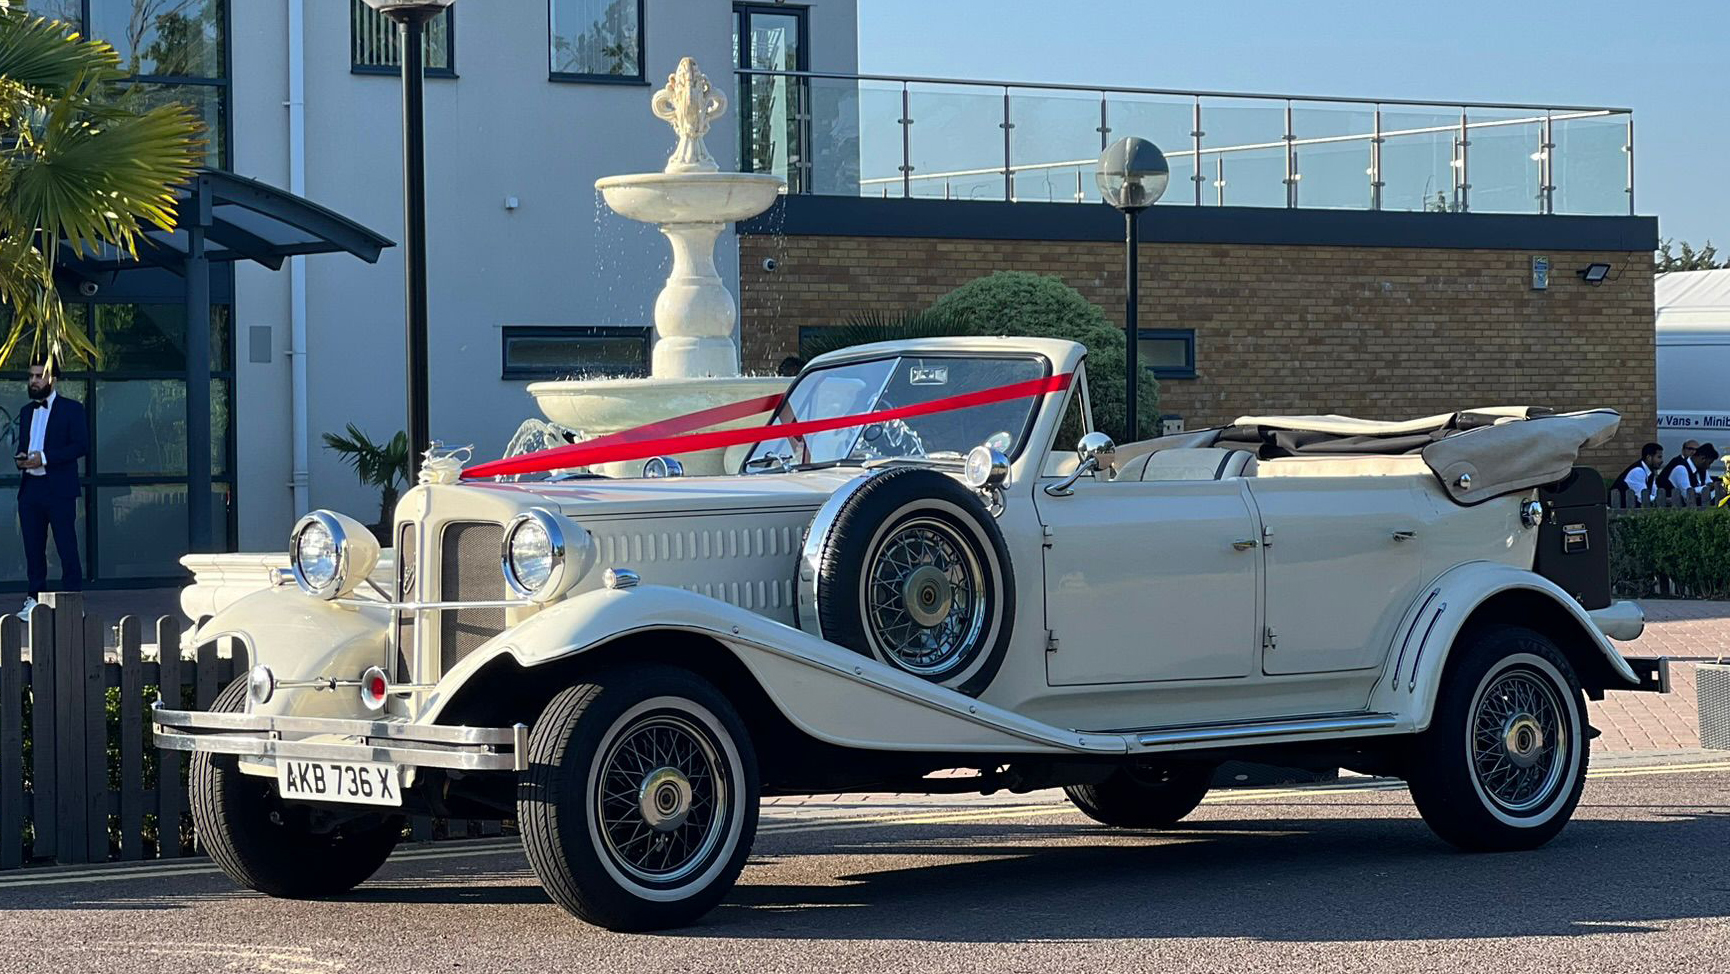 Ivory Convertible Beauford decorated with traditional wedding ribbons accross its bonnet.